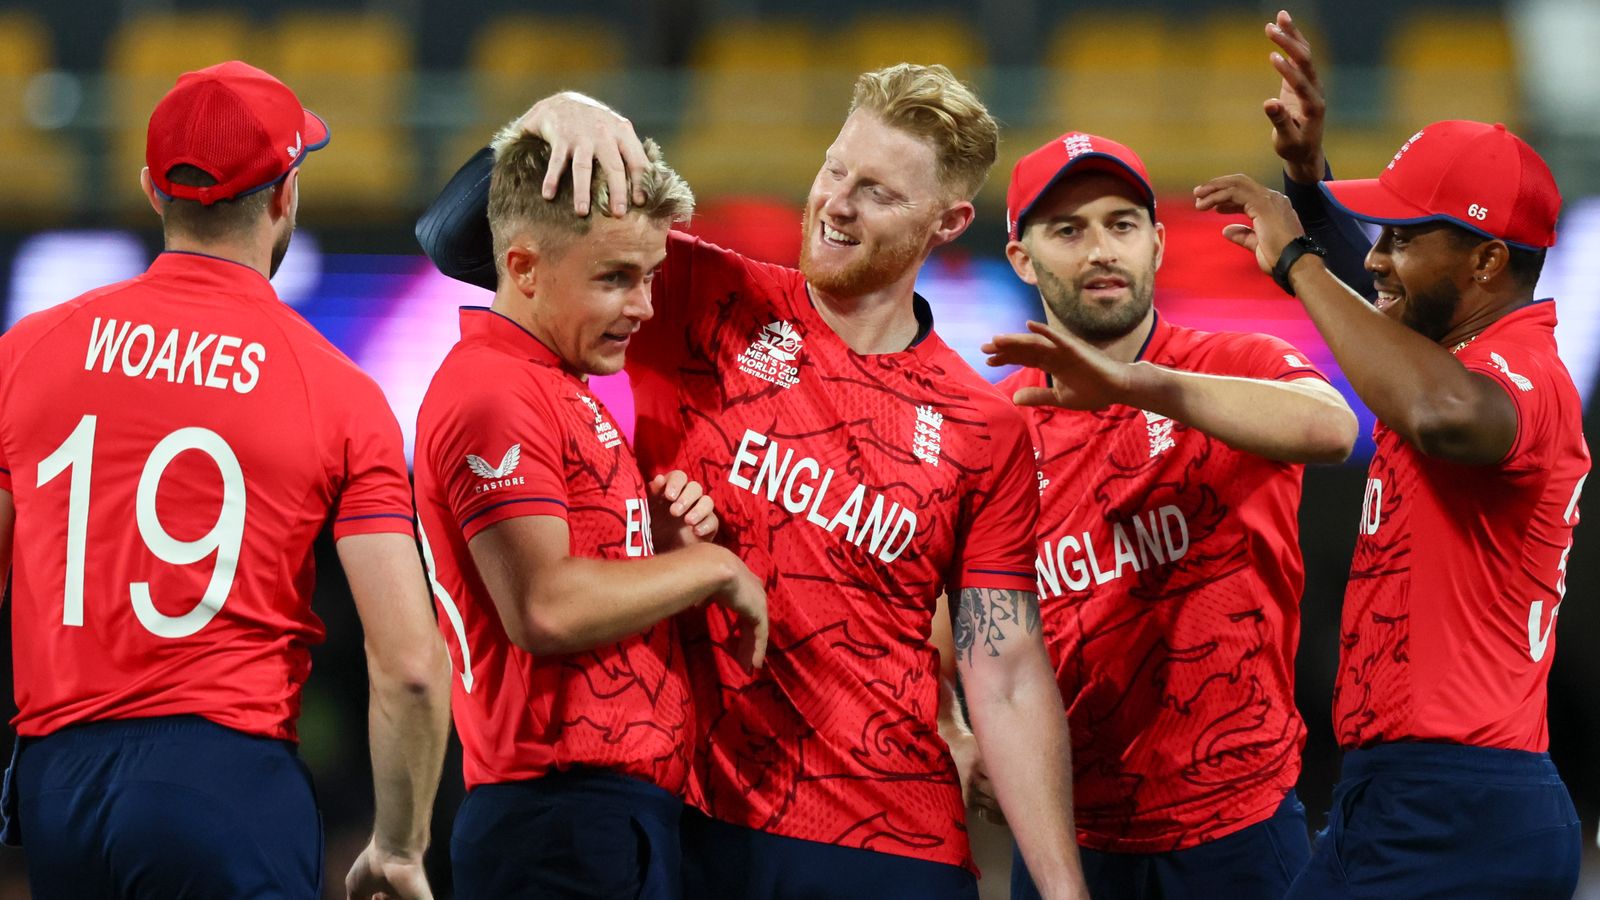 nasser-hussain-england-have-advantage-at-t20-world-cup-but-pitch-could-pose-a-challenge-against-sri-lanka